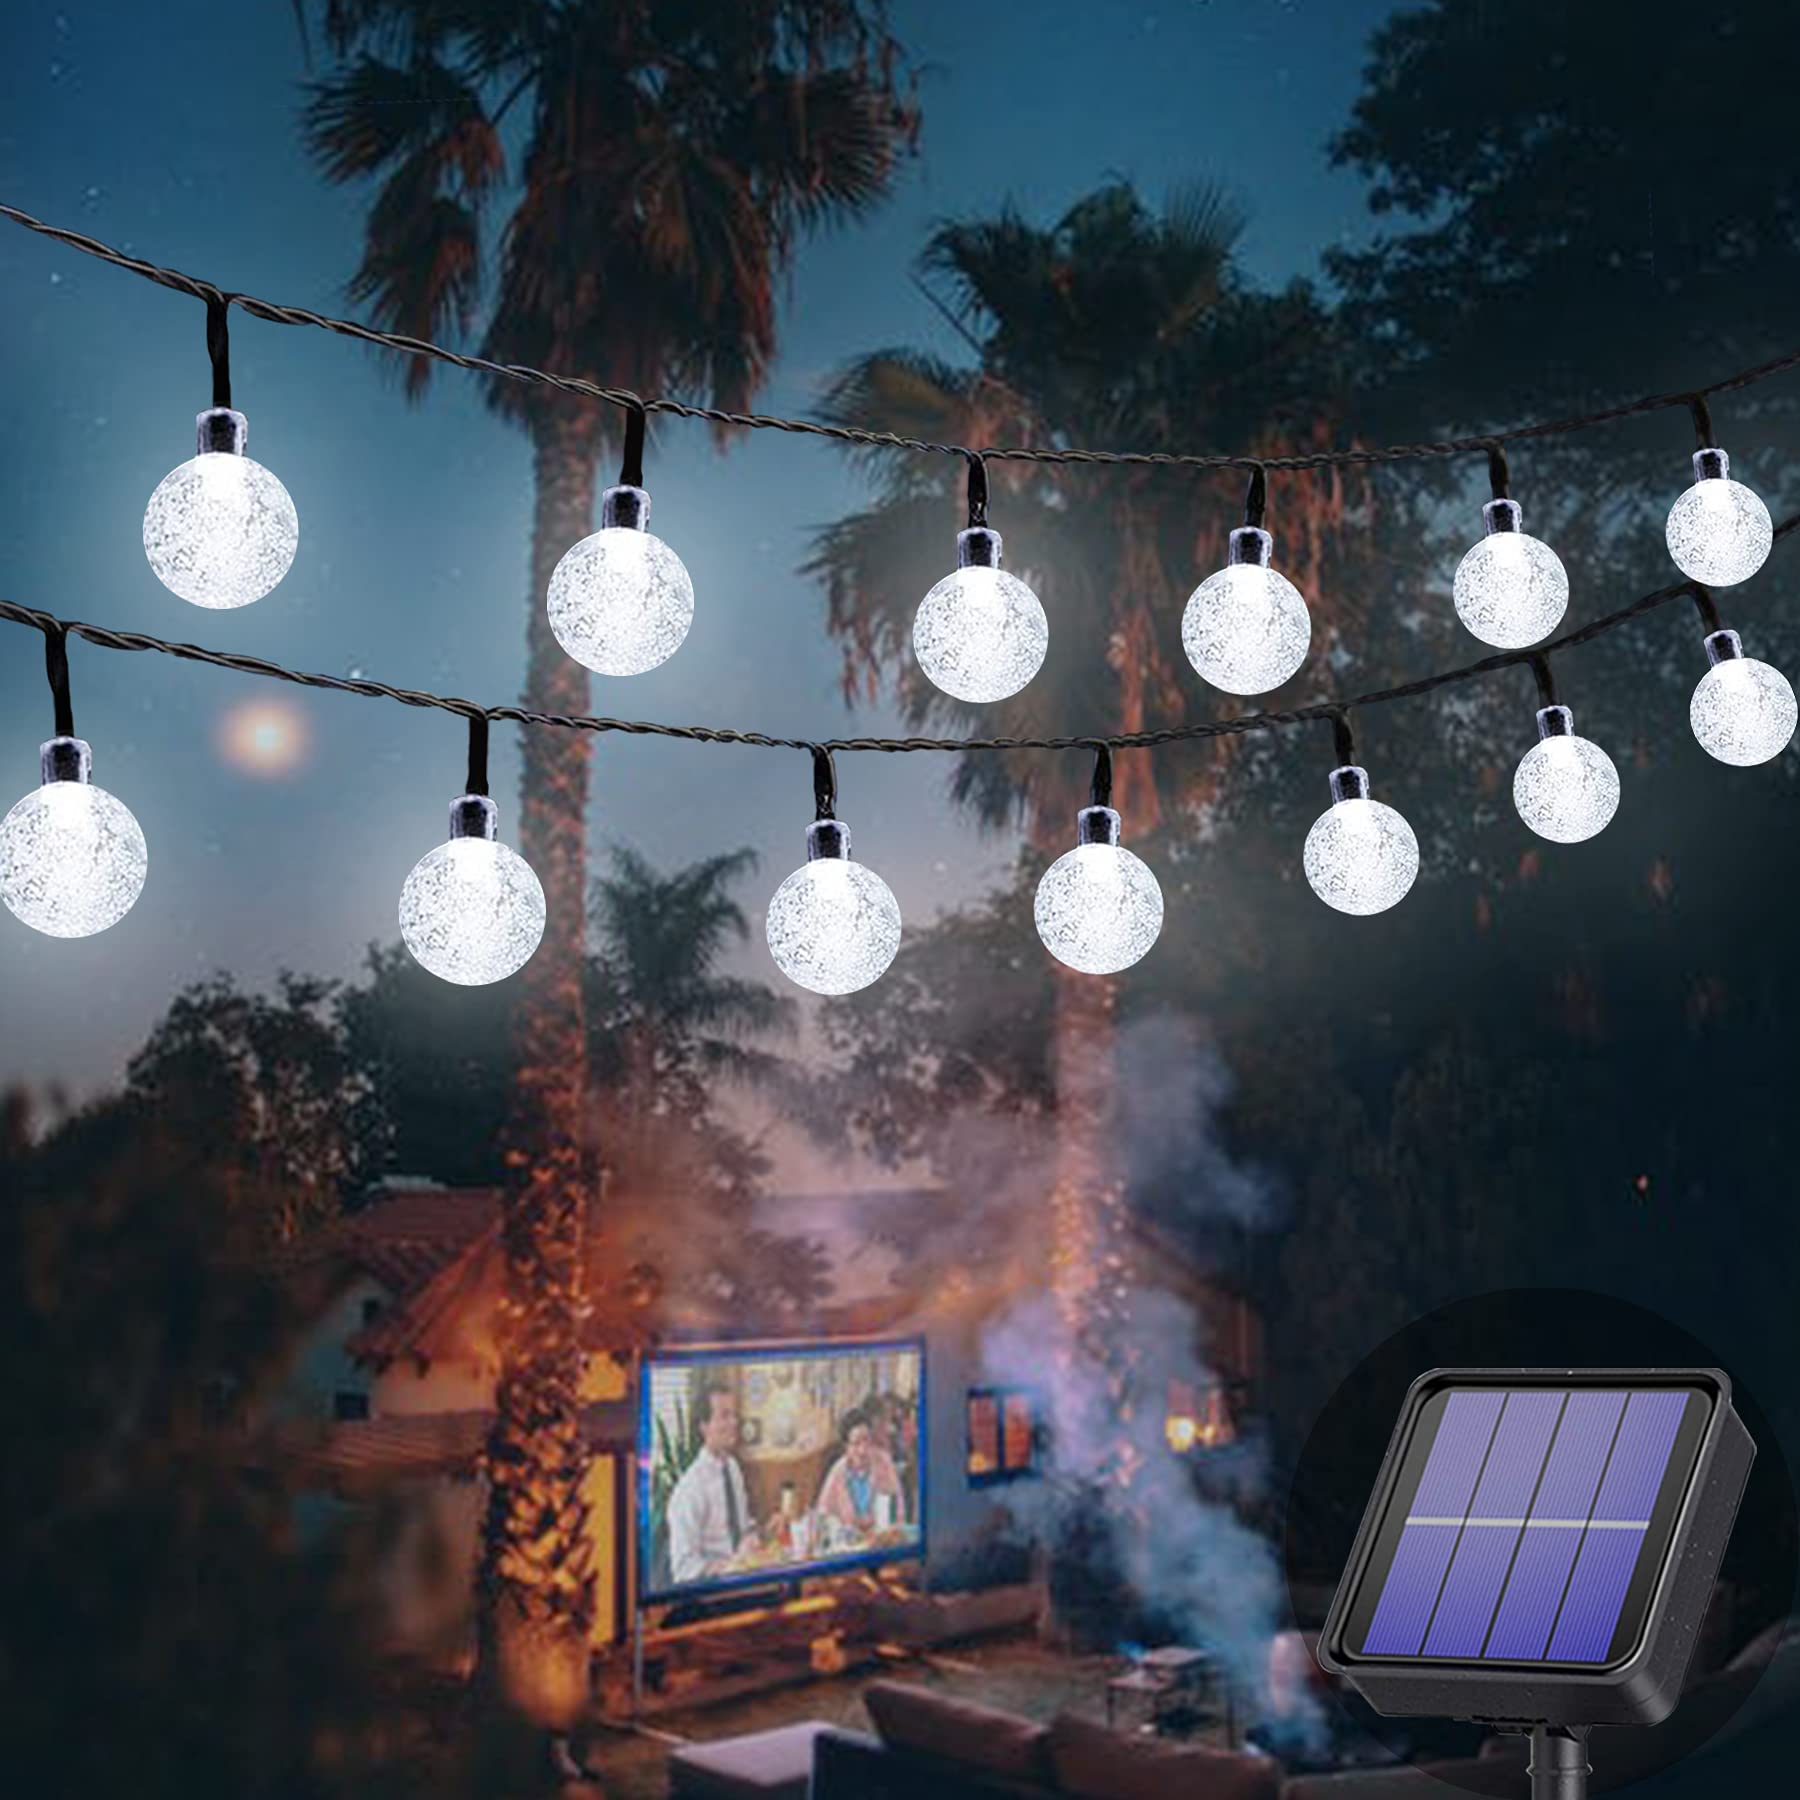 Augone Solar Garden Lights Waterproof, 50LED 7M/24Ft Solar String Lights Outdoor, 8 Modes Globe Fairy Lights for Indoor/Outdoor, Patio, Lawn, Yard, Wedding, Christmas Decorations (Cool White)